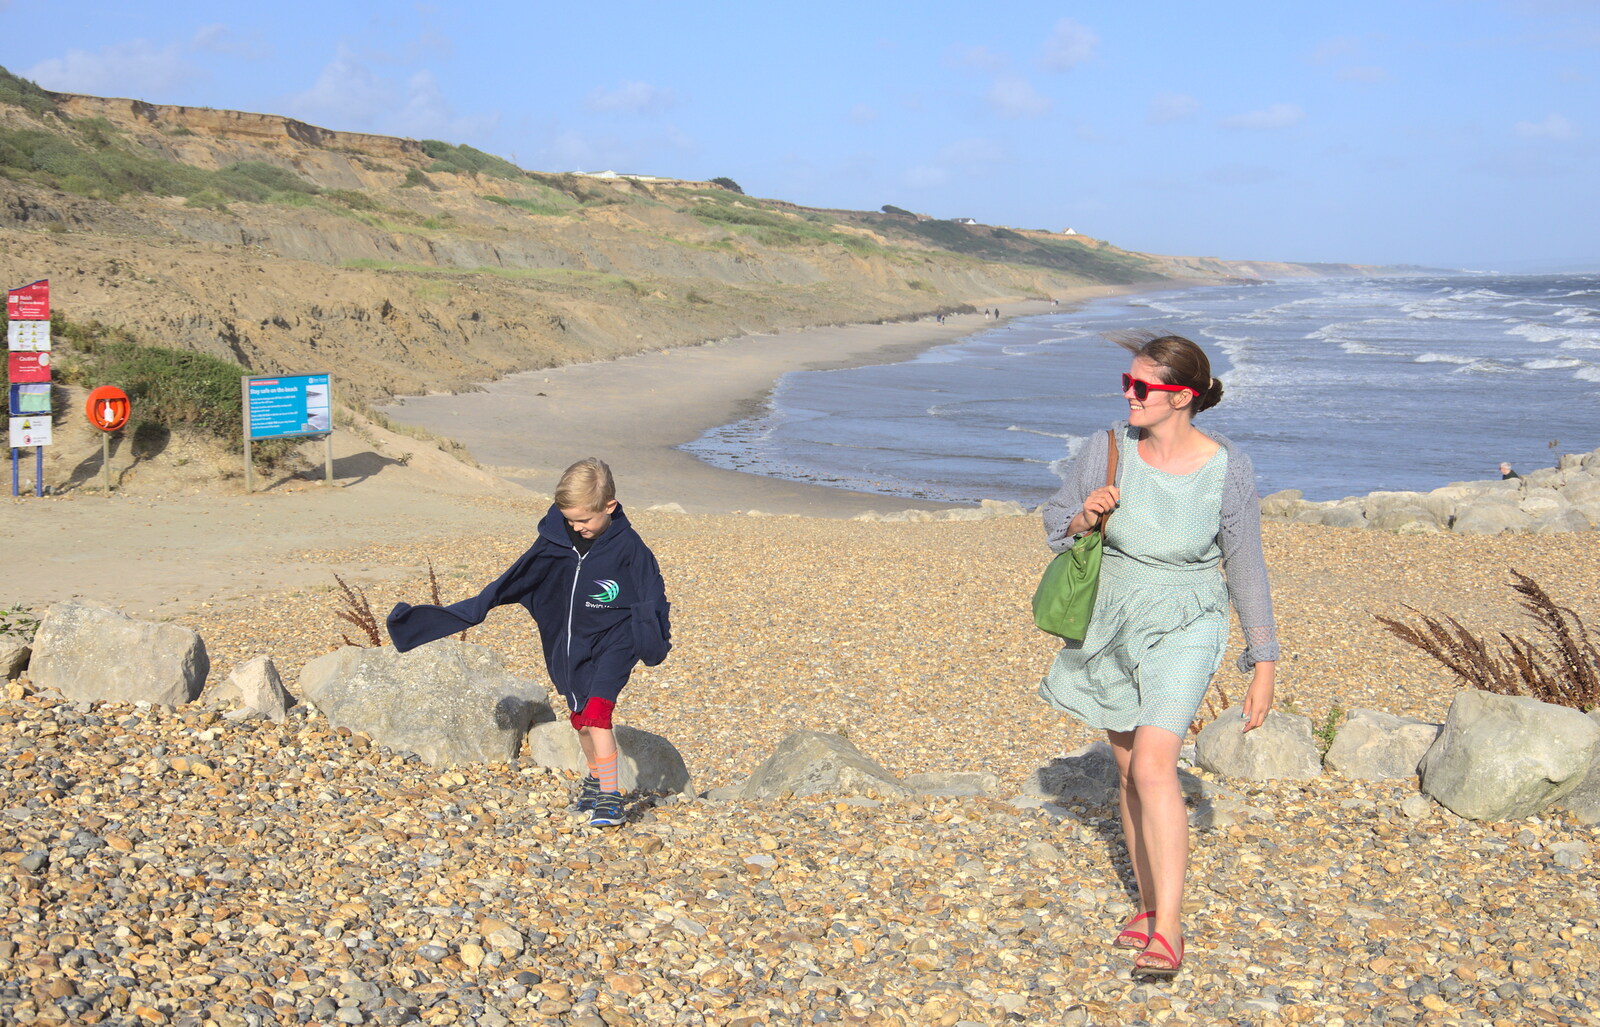 Harry in Nosher's hoodie, and Isobel from Blustery Beach Trips, Walkford and Highcliffe, Dorset - 29th July 2018